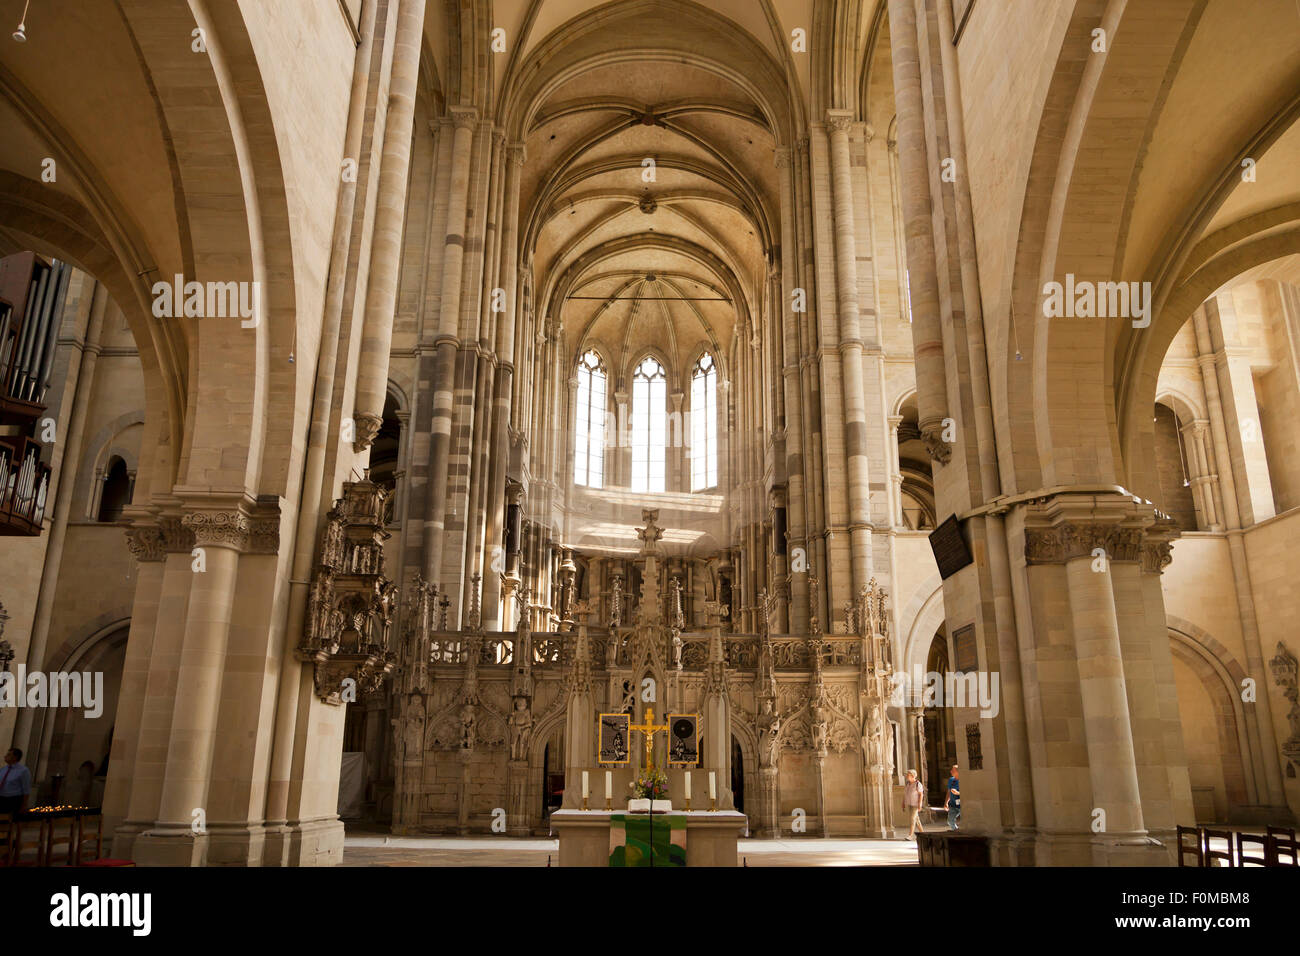 Interior of the Magdeburg Cathedral, Magdeburg, Saxony- Anhalt, Germany Stock Photo